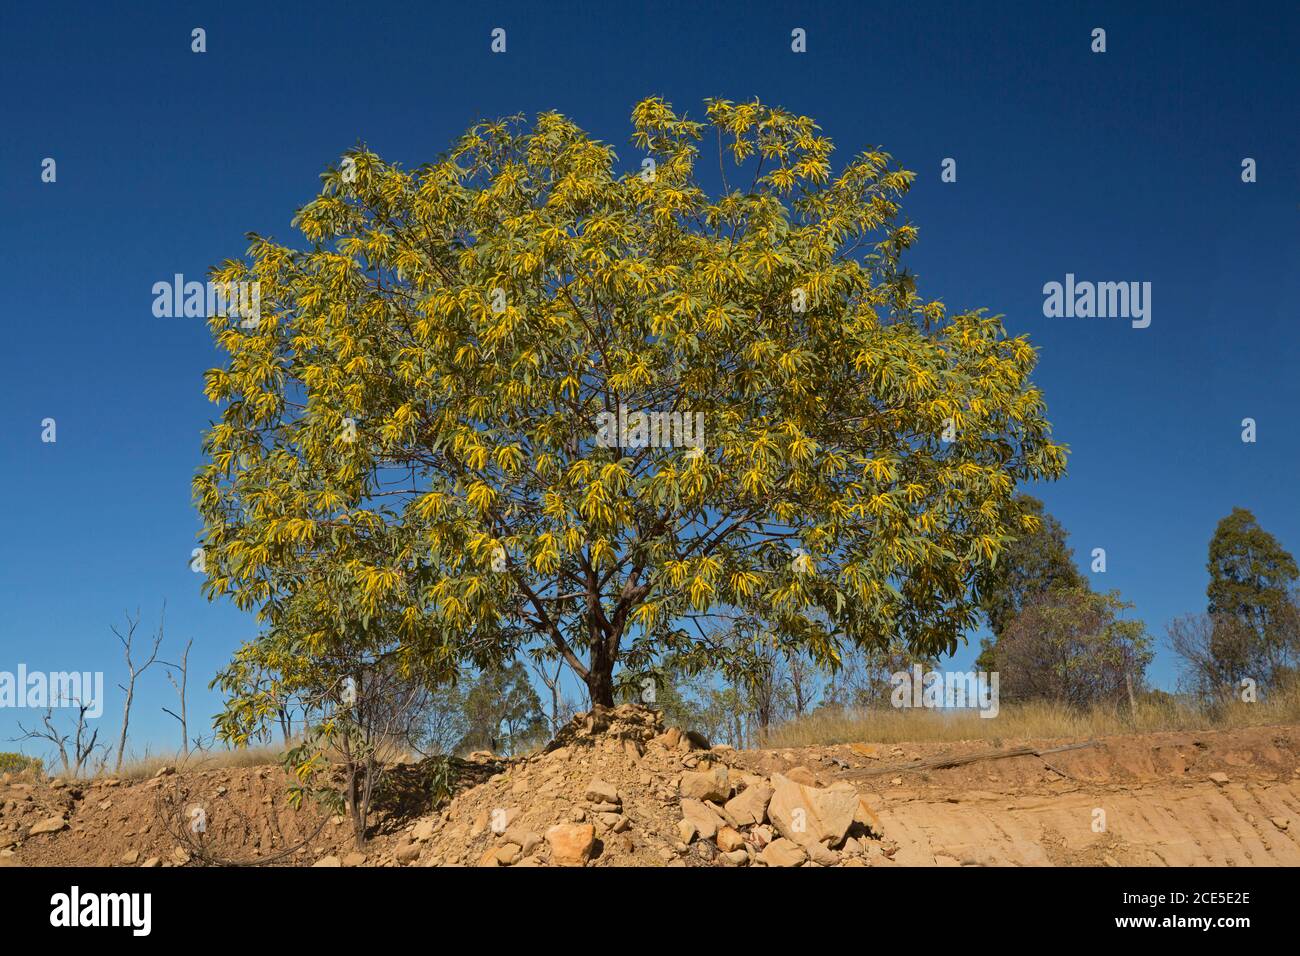 Wattle tree, Acacia crassa subspecies longicoma, covered with long vivid yellow flowers, against background of blue sky in outback Australia Stock Photo